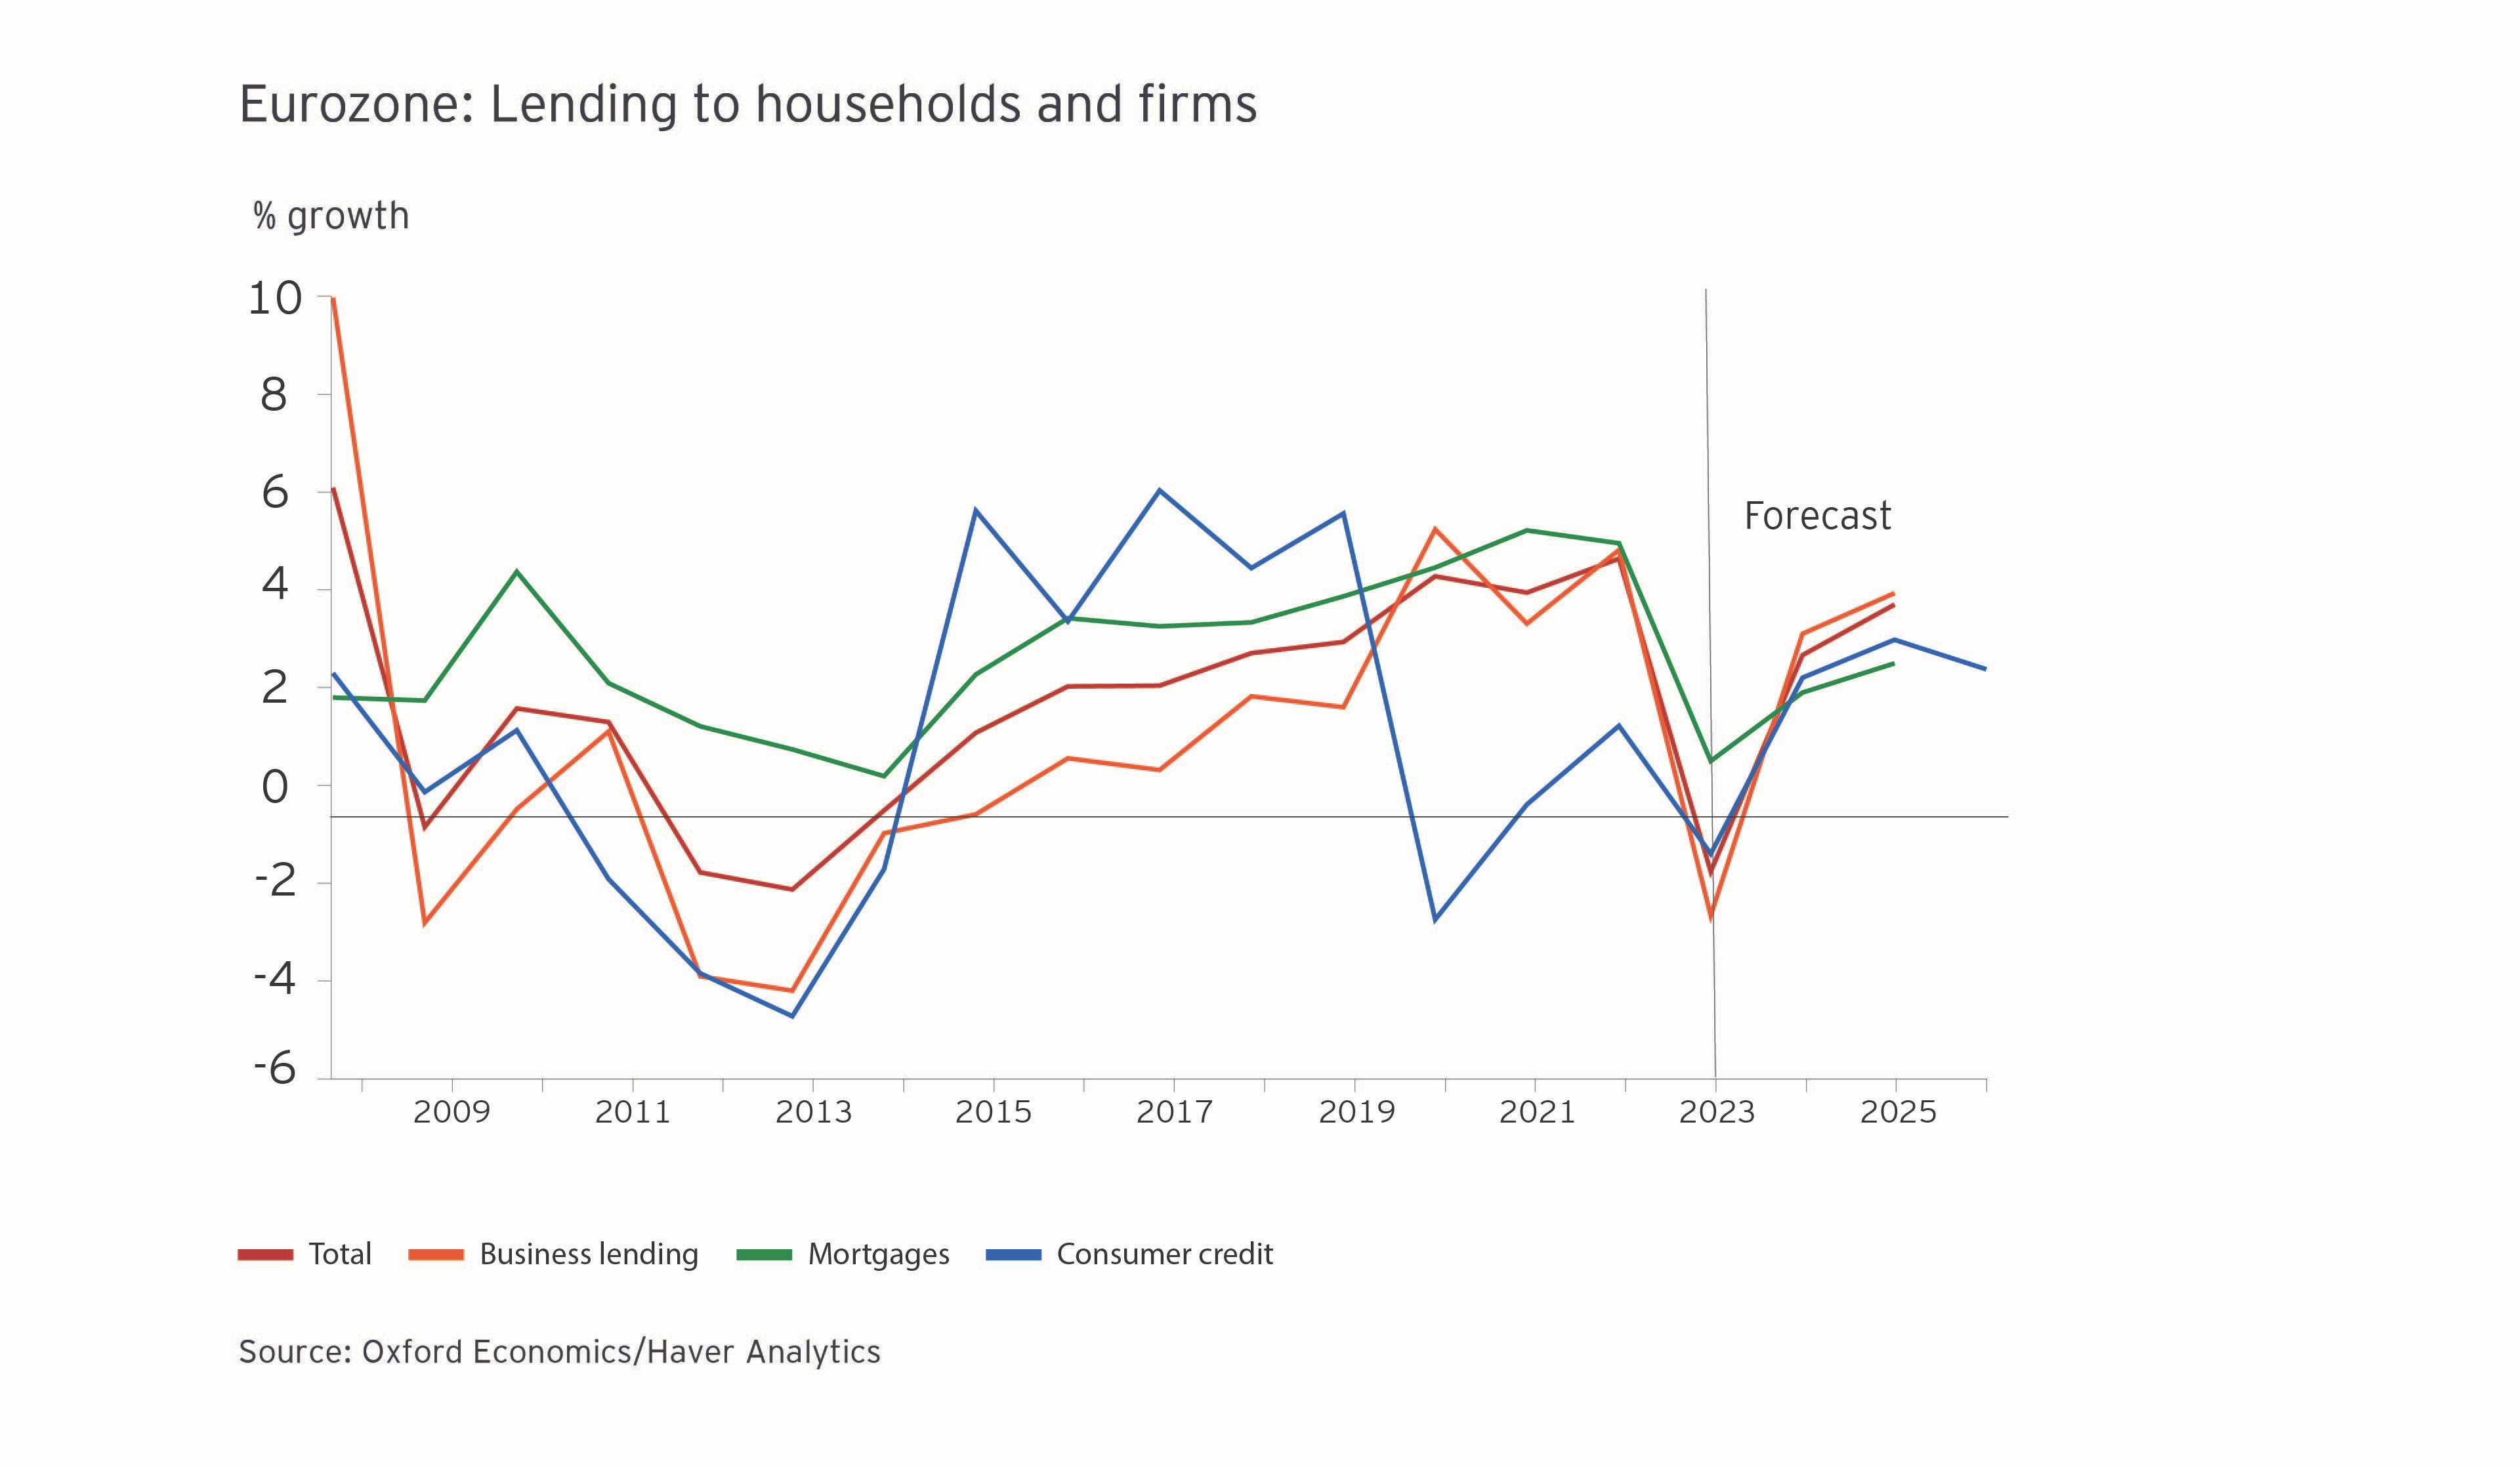 Eurozone lending to households and firms